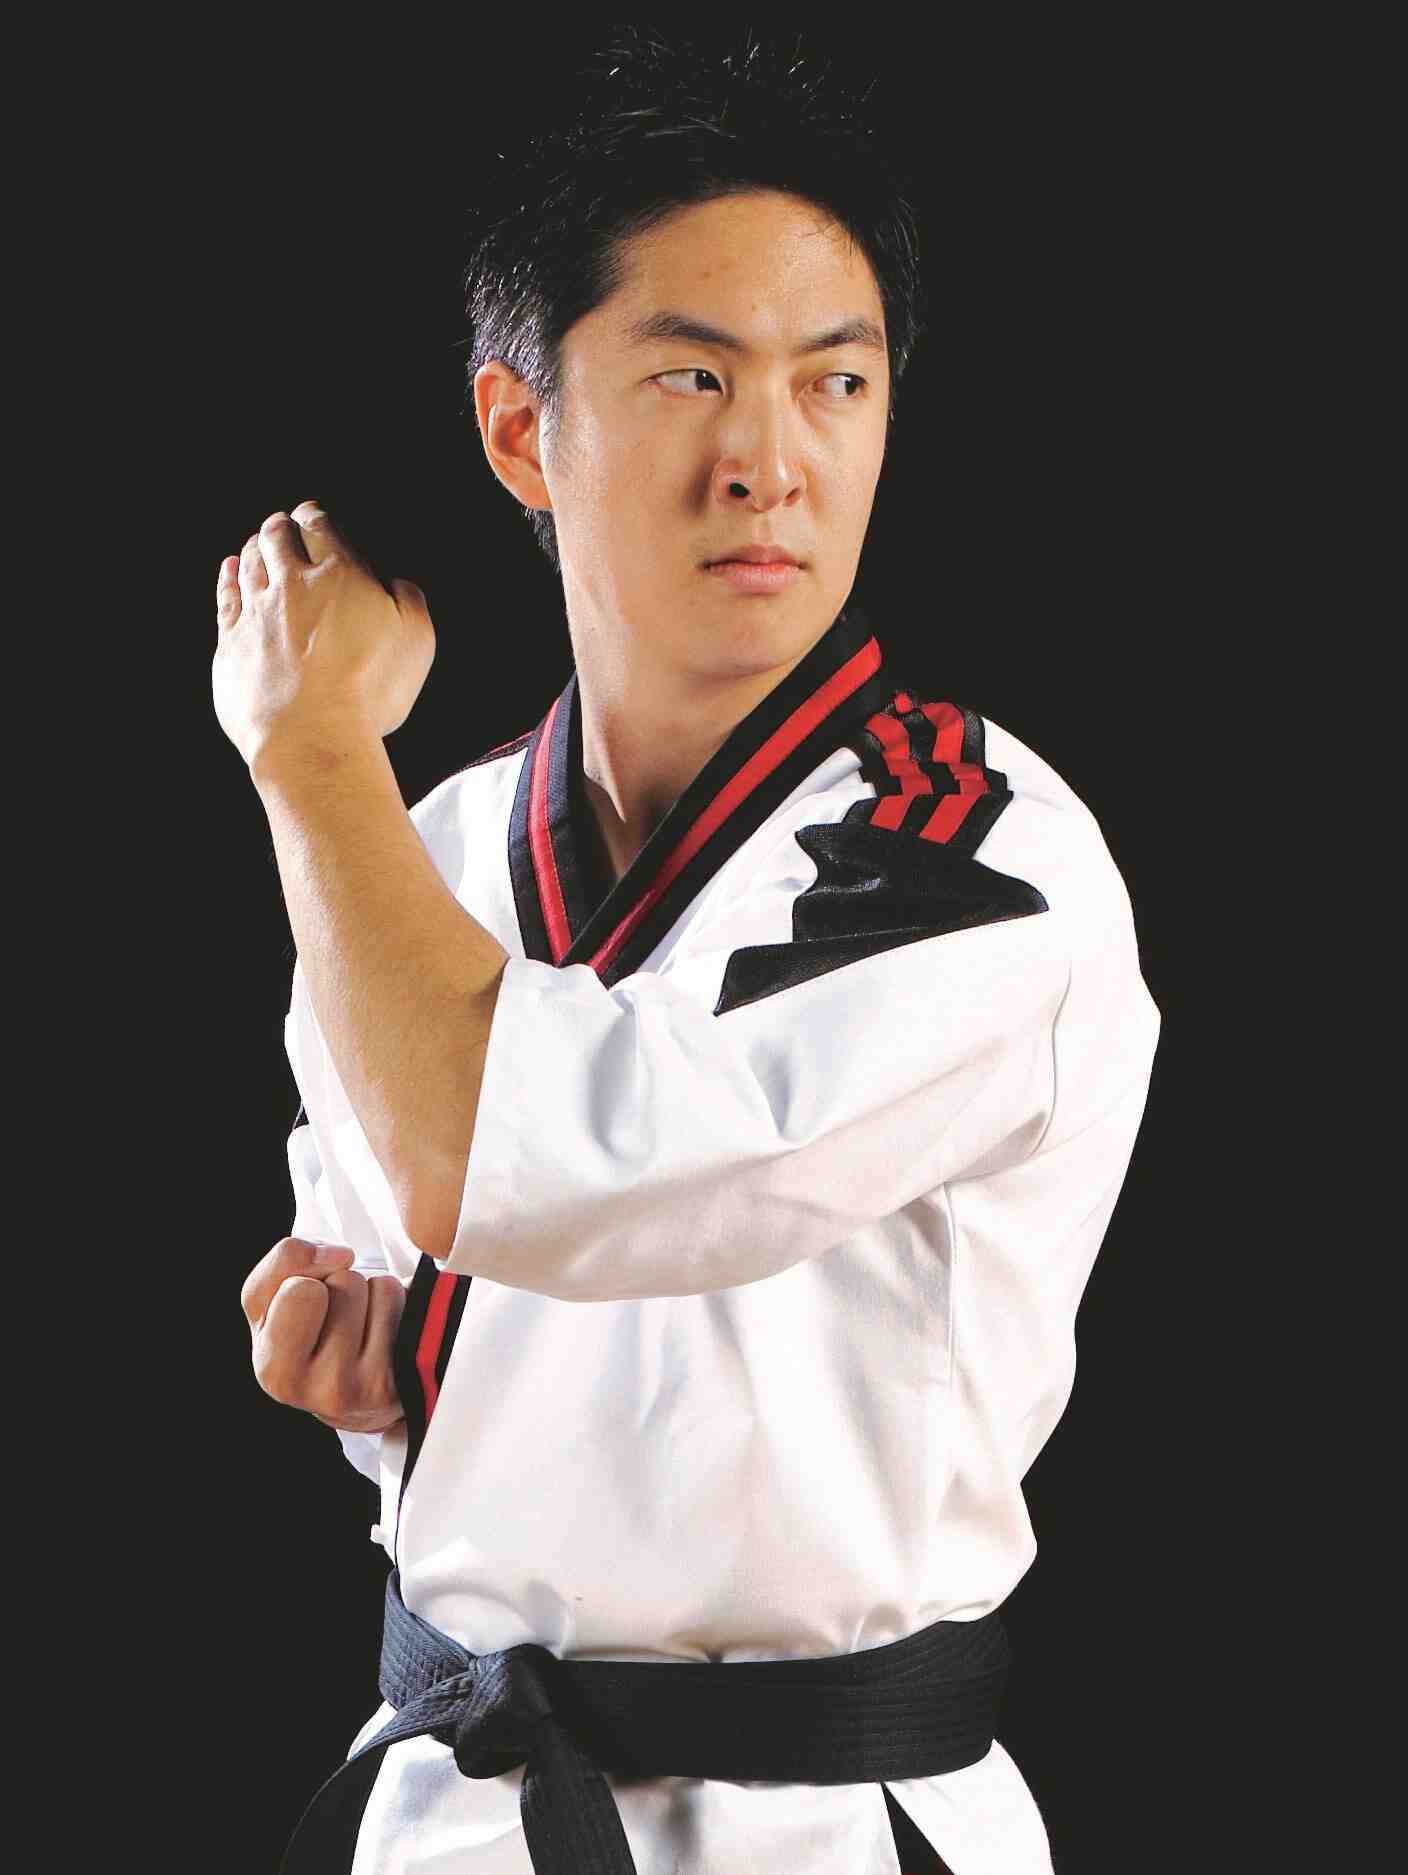 What are the four main martial arts?